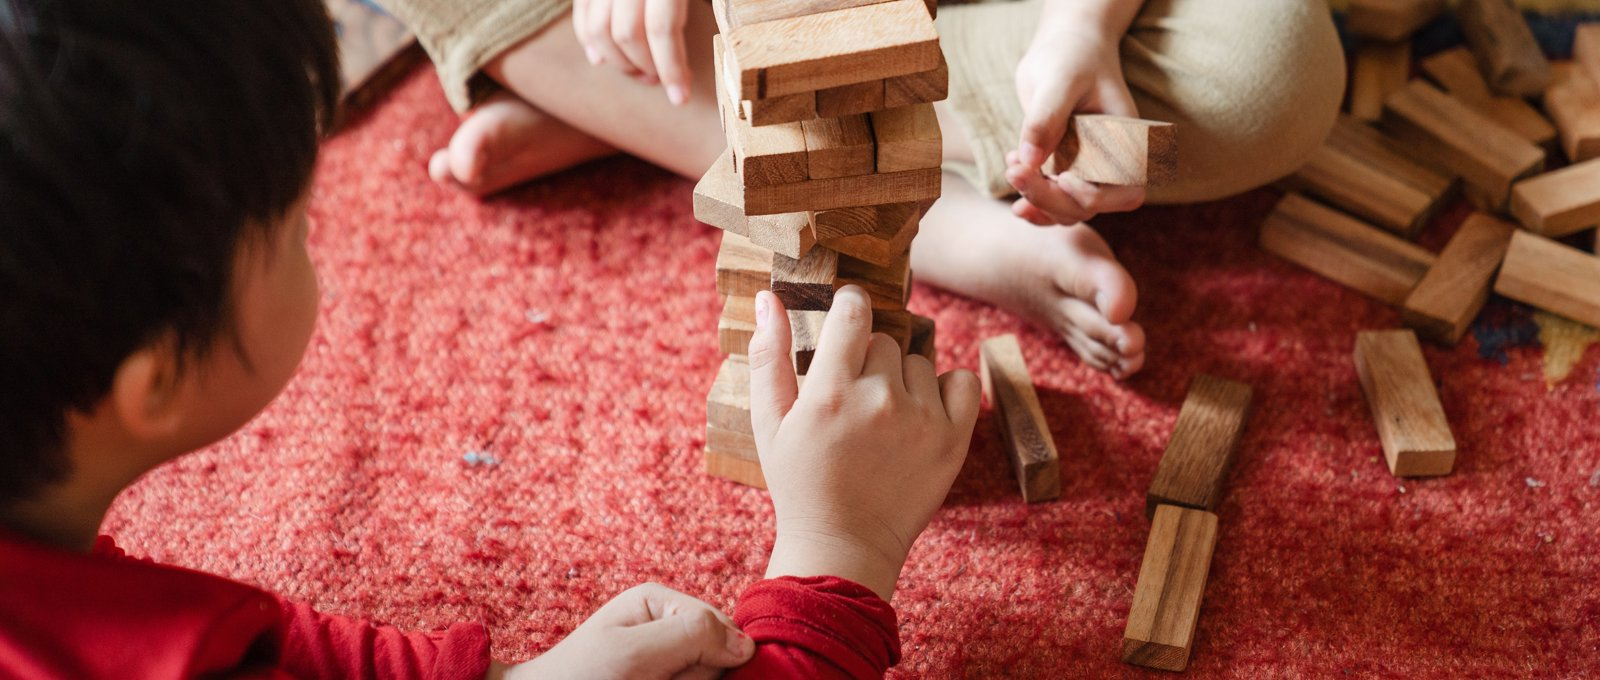 Photograph of two children sitting on the floor playing the game Jenga